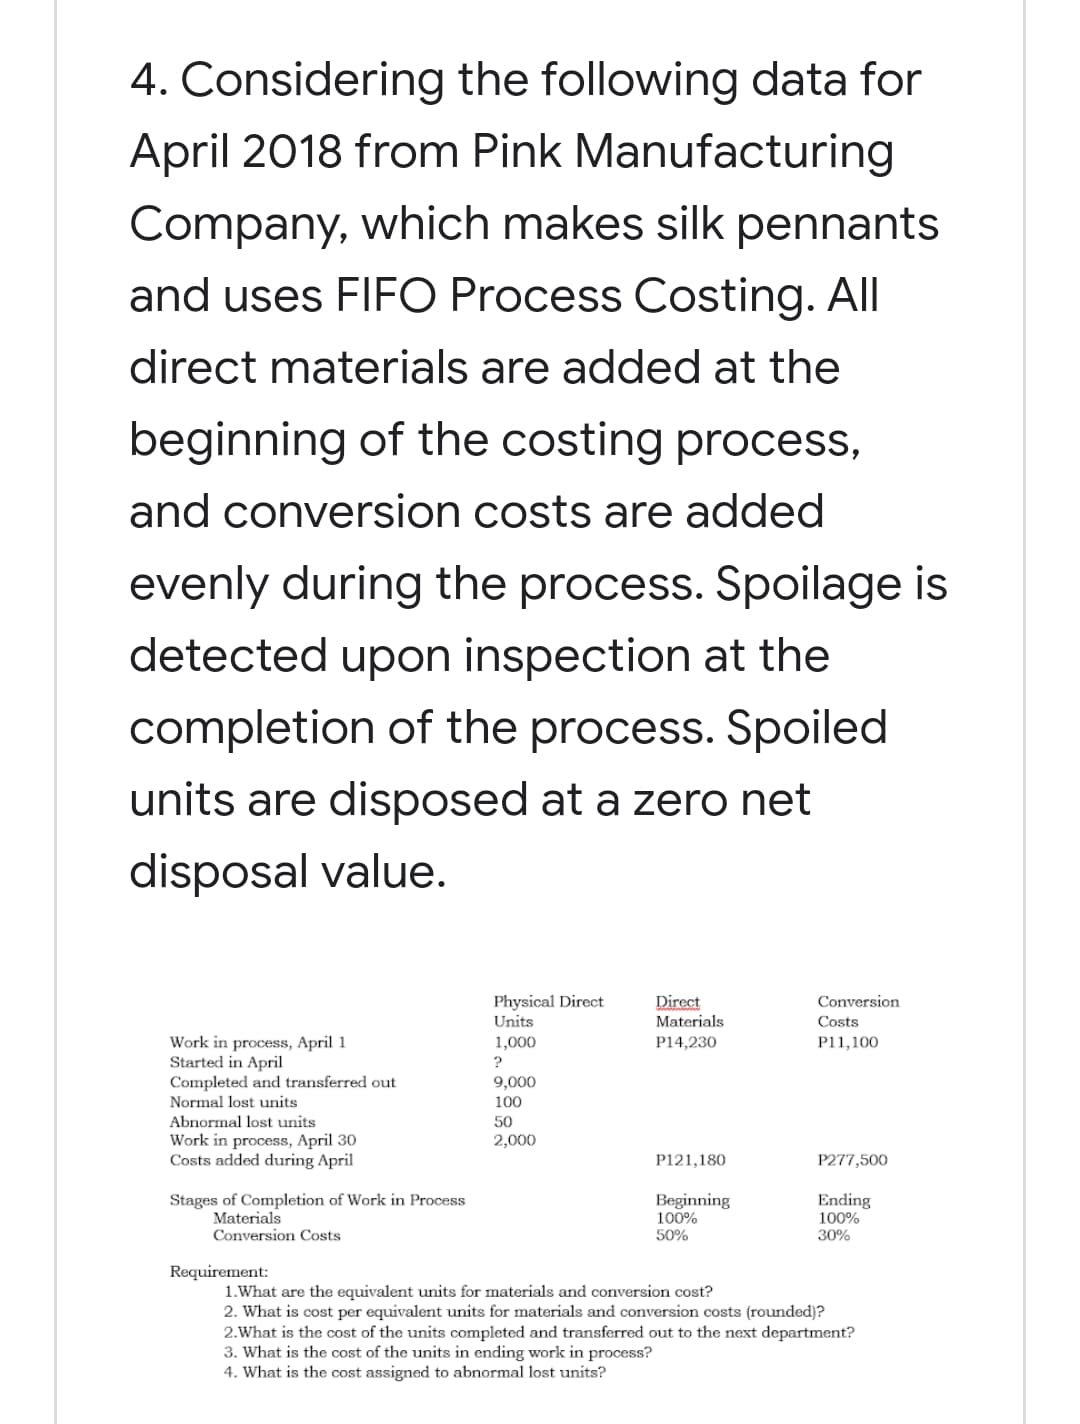 4. Considering the following data for
April 2018 from Pink Manufacturing
Company, which makes silk pennants
and uses FIFO Process Costing. All
direct materials are added at the
beginning of the costing process,
and conversion costs are added
evenly during the process. Spoilage is
detected upon inspection at the
completion of the process. Spoiled
units are disposed at a zero net
disposal value.
Physical Direct
Units
Direct
Materials
Conversion
Costs
Work in process, April 1
Started in April
Completed and transferred out
1,000
P14,230
P11,100
?
9,000
Normal lost units
100
Abnormal lost units
50
Work in process, April 30
Costs added during April
2,000
P121,180
P277,500
Stages of Completion of Work in Process
Materials
Conversion Costs
Beginning
100%
50%
Ending
100%
30%
Requirement:
1.What are the equivalent units for materials and conversion cost?
2. What is cost per equivalent units for materials and conversion costs (rounded)?
2.What is the cost of the units completed and transferred out to the next department?
3. What is the cost of the units in ending work in process?
4. What is the cost assigned to abnormal lost units?
